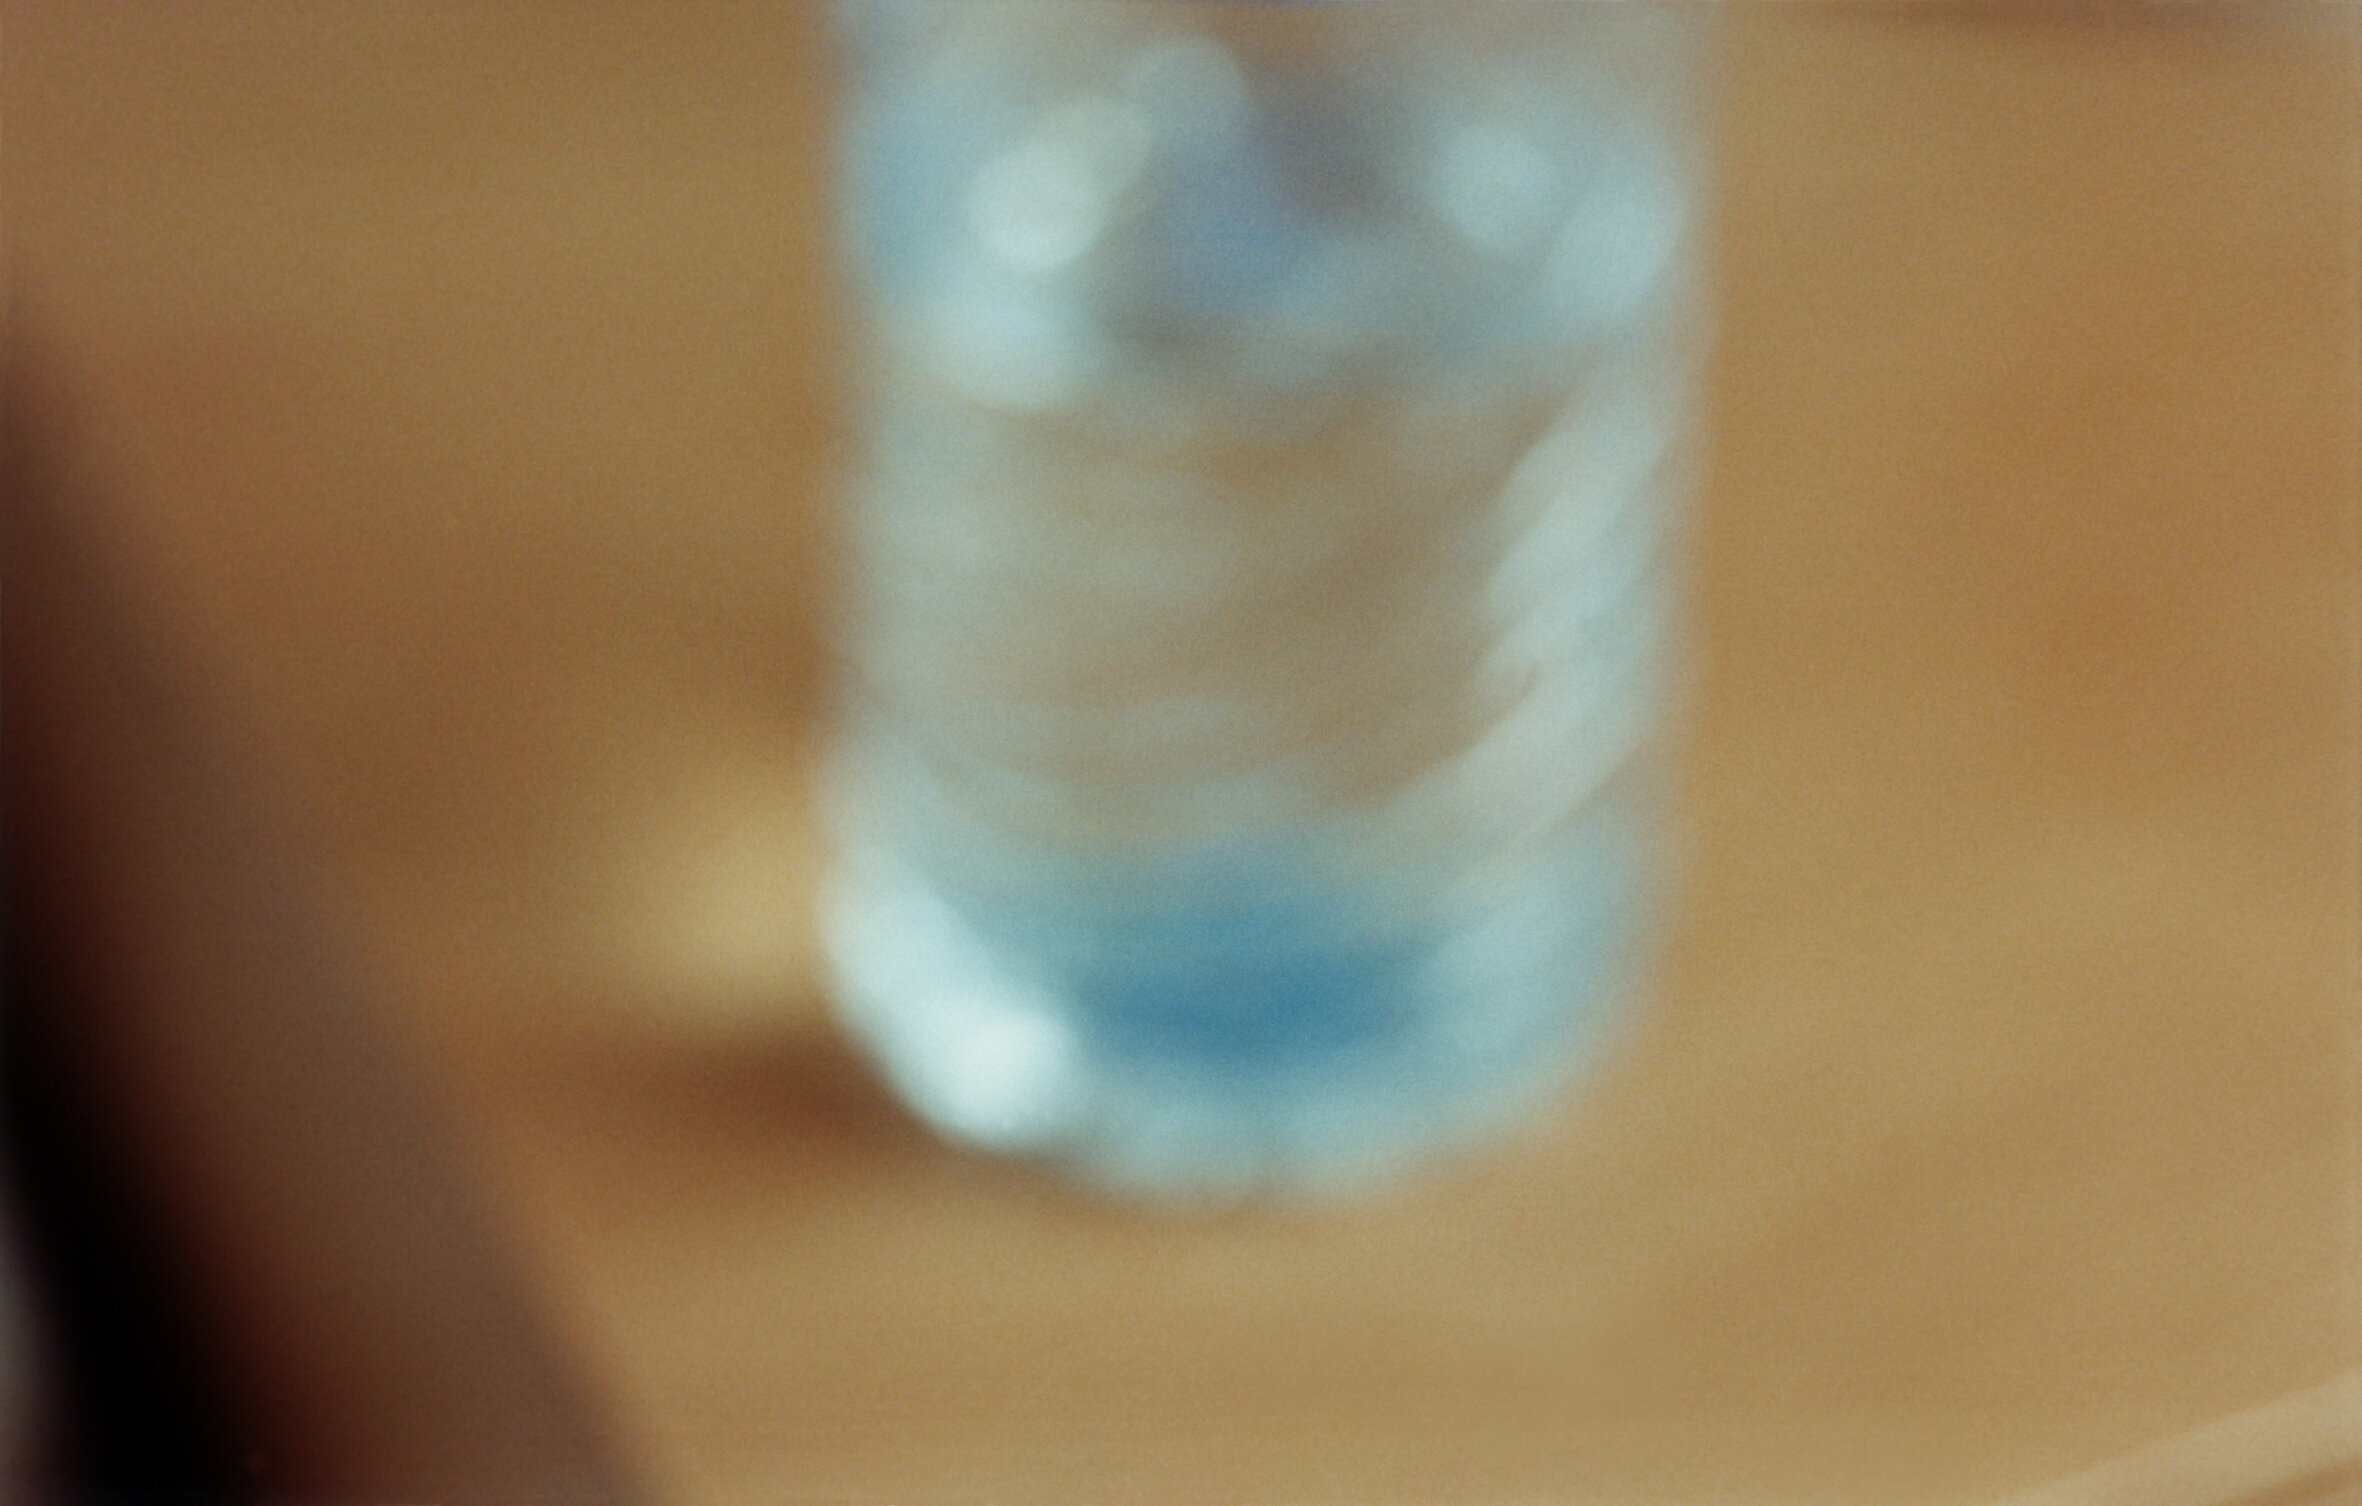   Water bottle on the night table,  2001  Archival pigment print on cotton paper  13 x 21.7 in. on 19.7 x 27.6 in. paper (33 x 55 cm. on  50 x 70 cm.) 